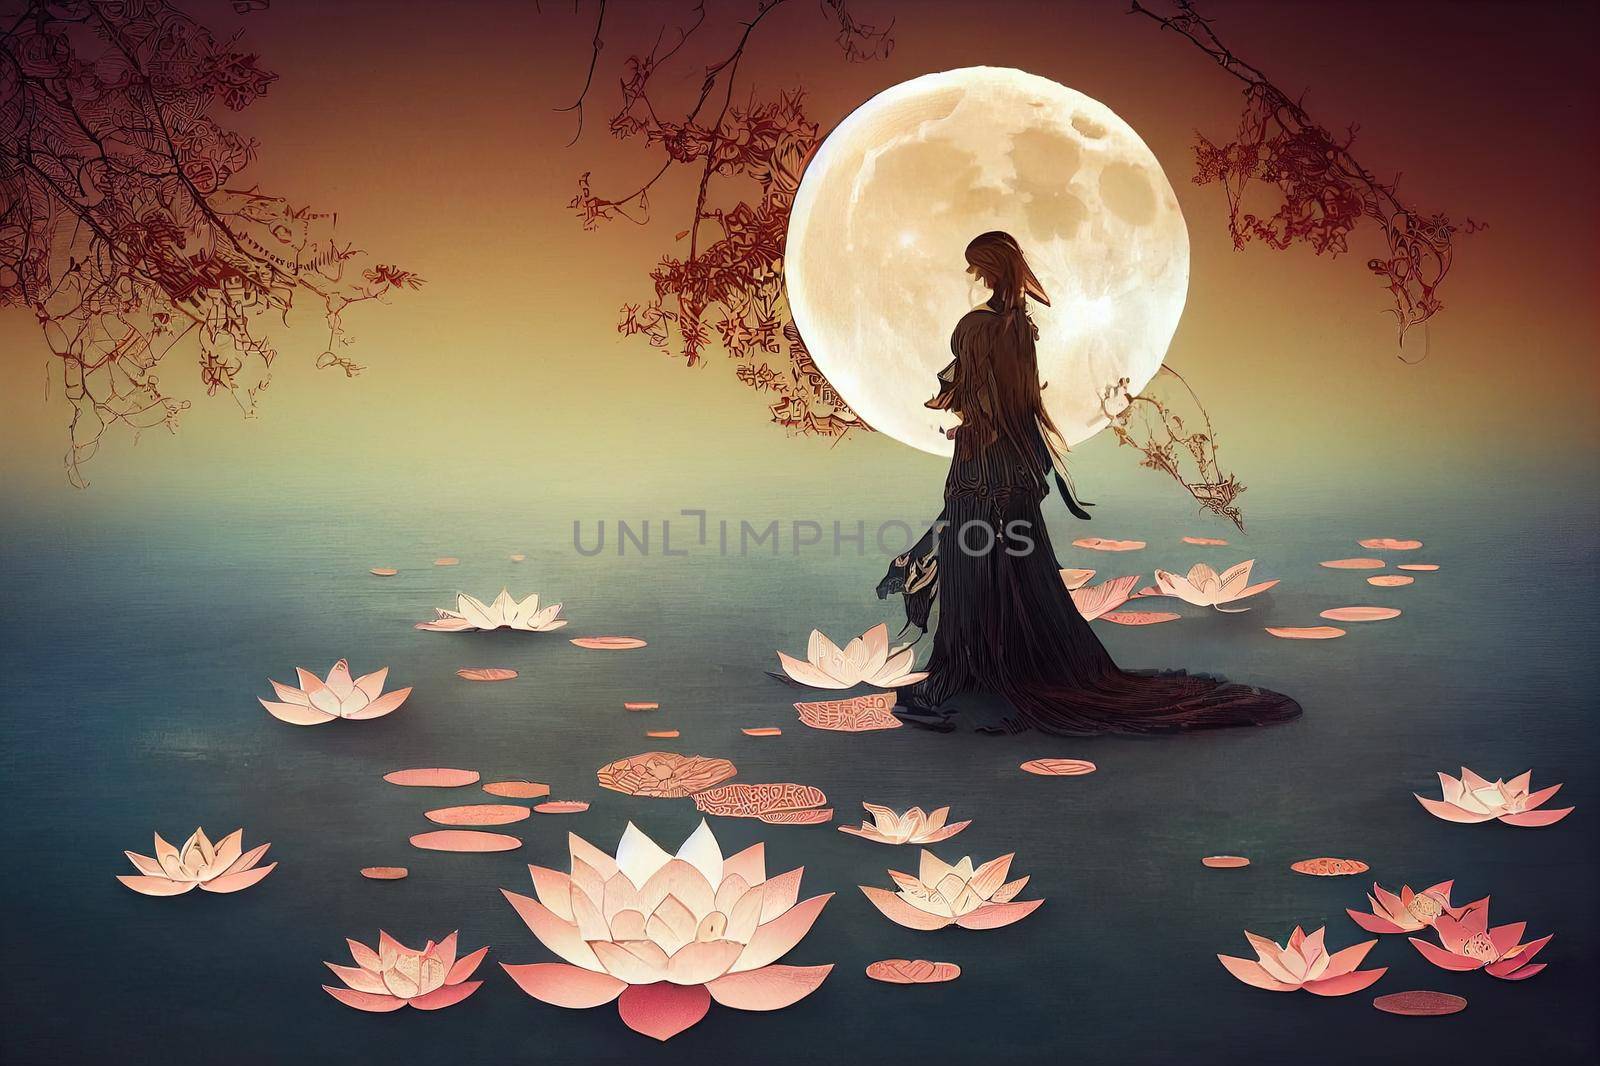 Papercut style lovely moon in the middle of lotus High quality 2d illustration. by 2ragon